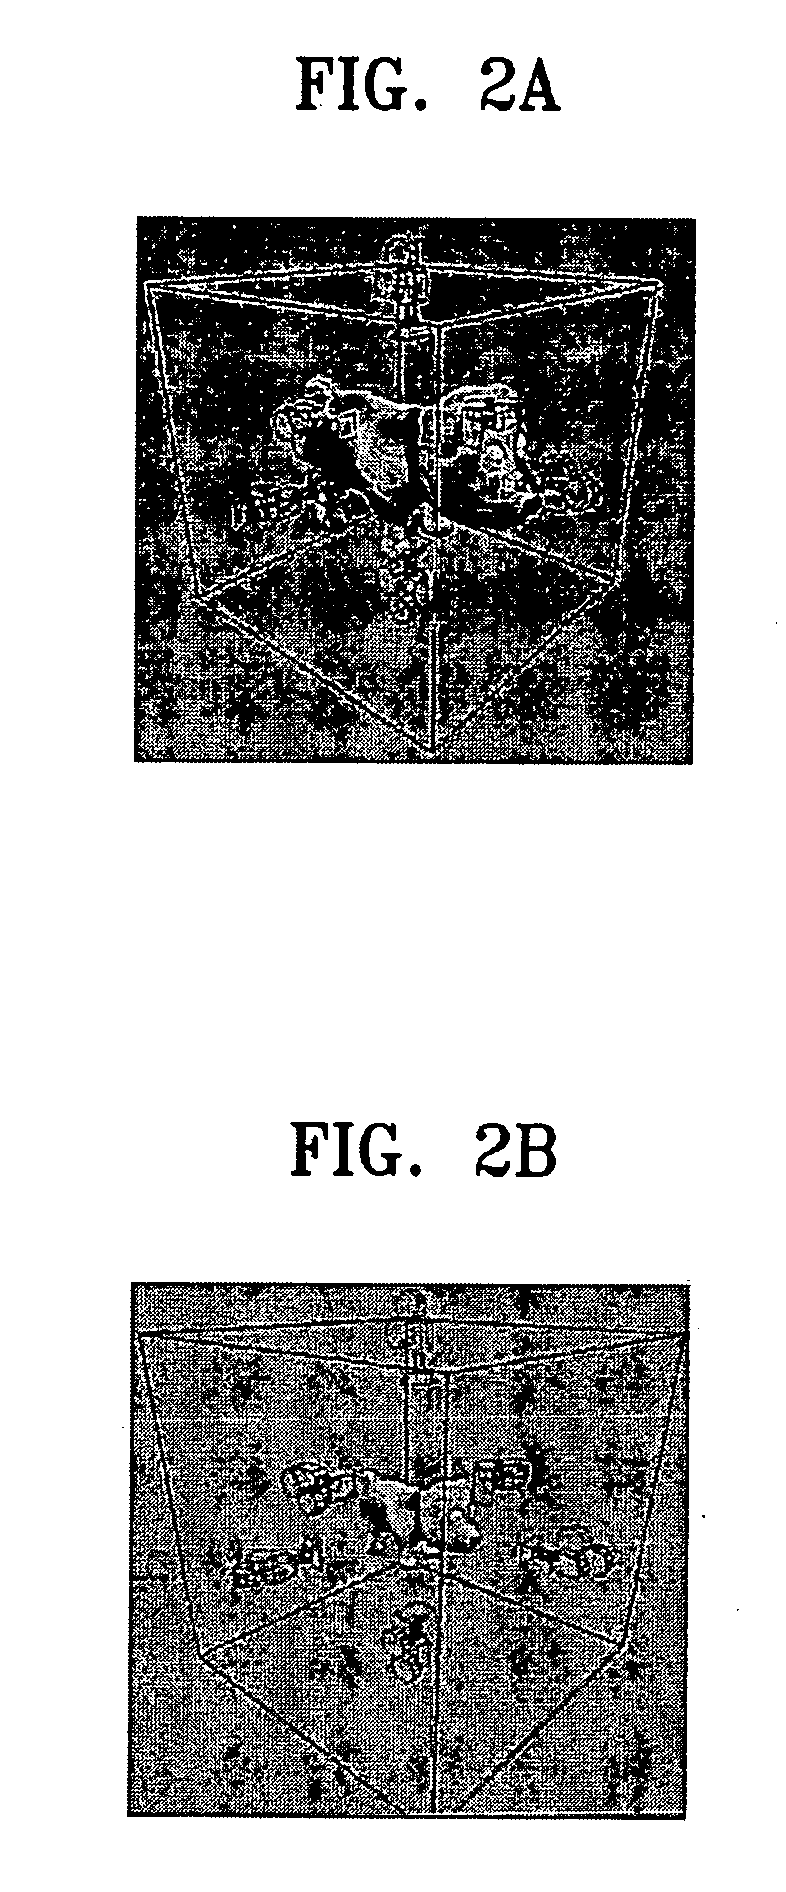 Depth image-based modeling method and apparatus